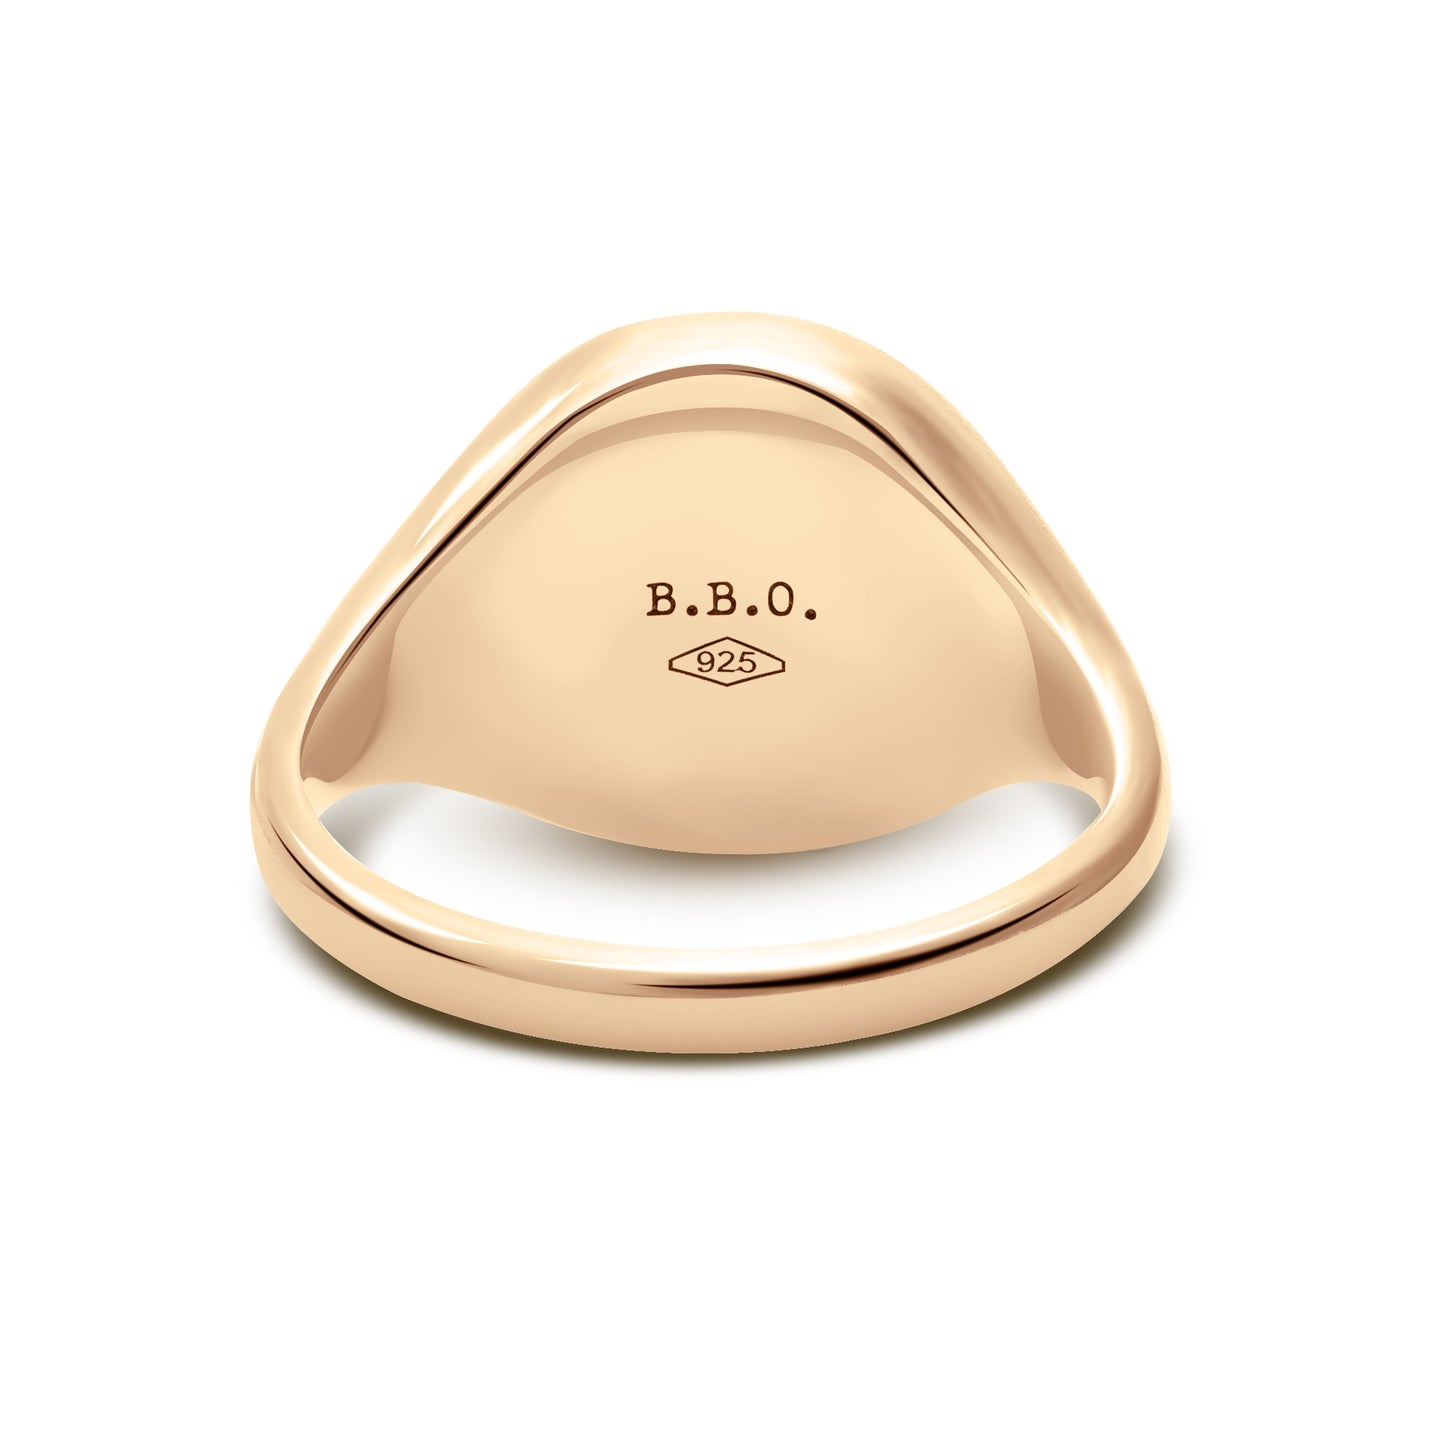 Cushion Signet Ring Standard Face Size (18K Yellow Gold)